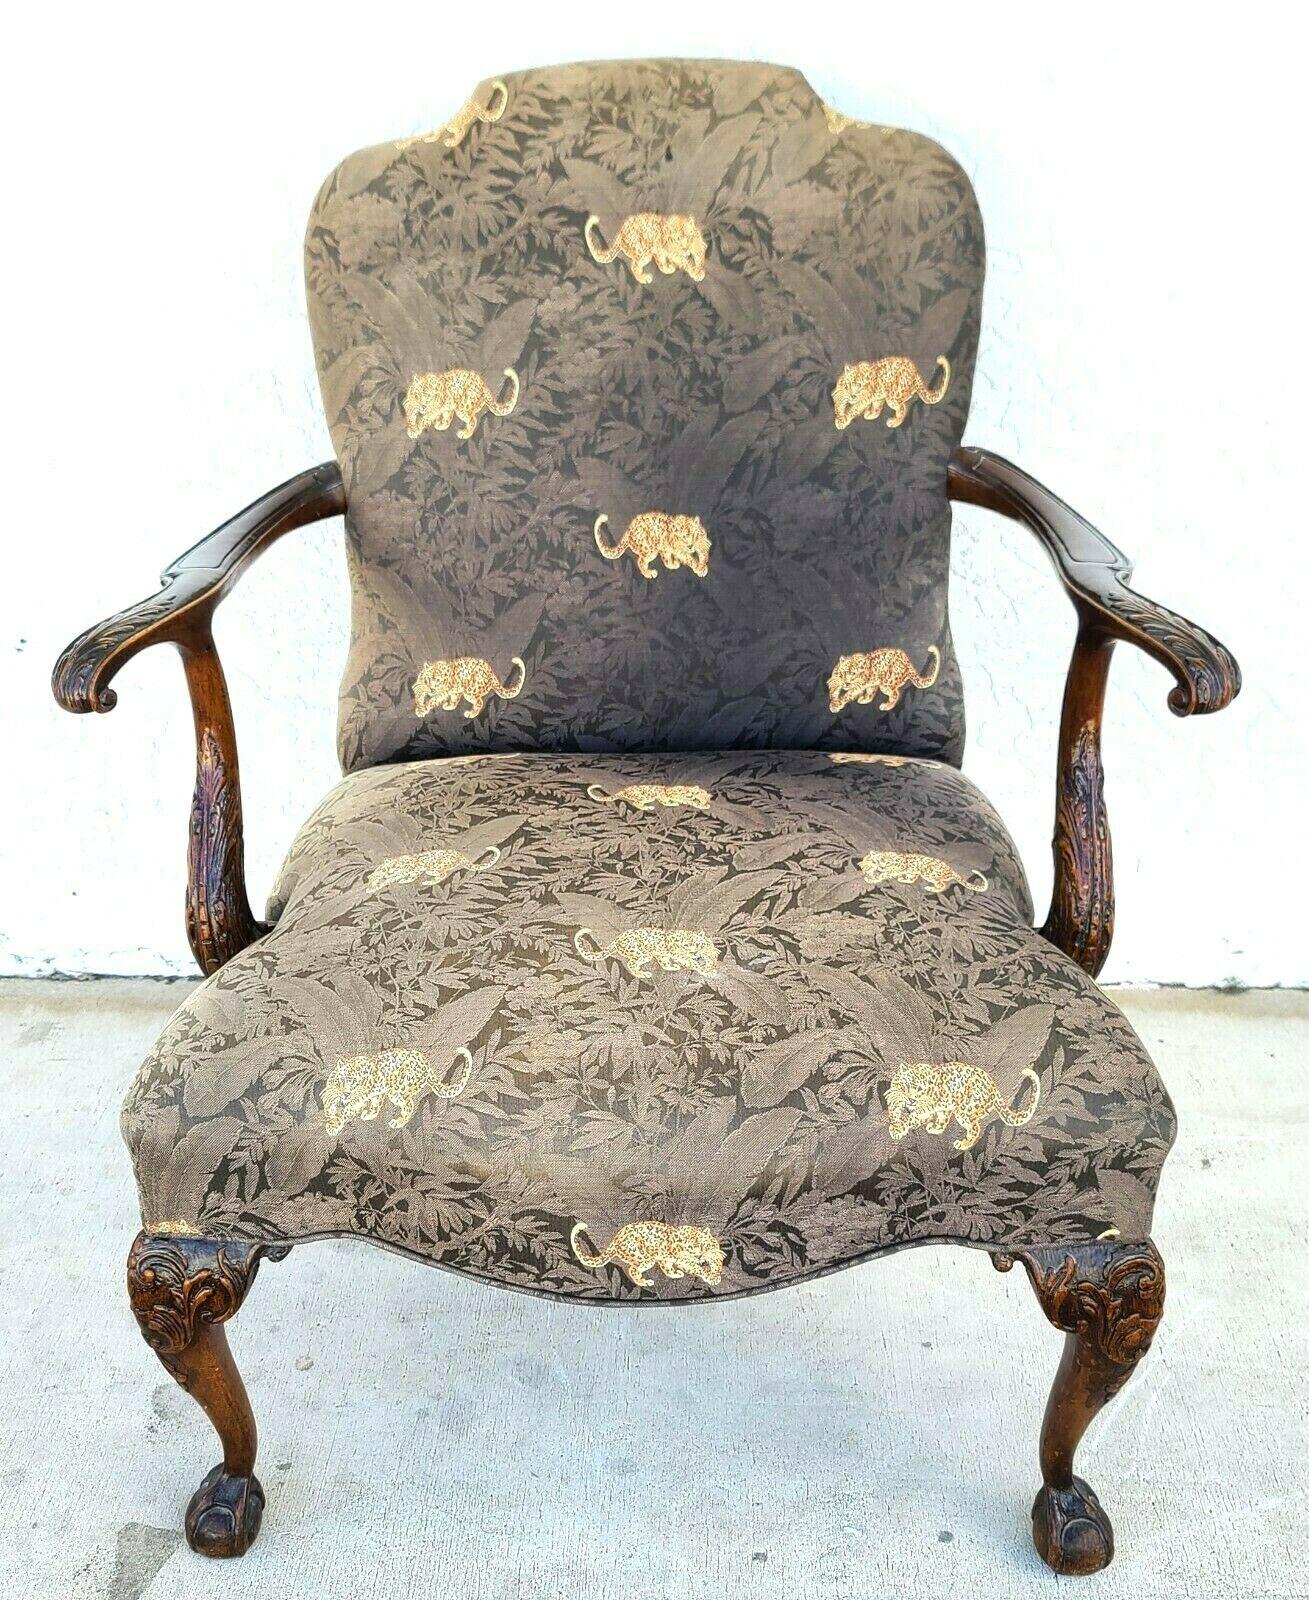 For full item description be sure to click on CONTINUE READING at the bottom of this listing.
Offering one of our recent Palm Beach estate fine furniture acquisitions of a
antique French Louis XV hand carved walnut armchair.
It's a fantastic